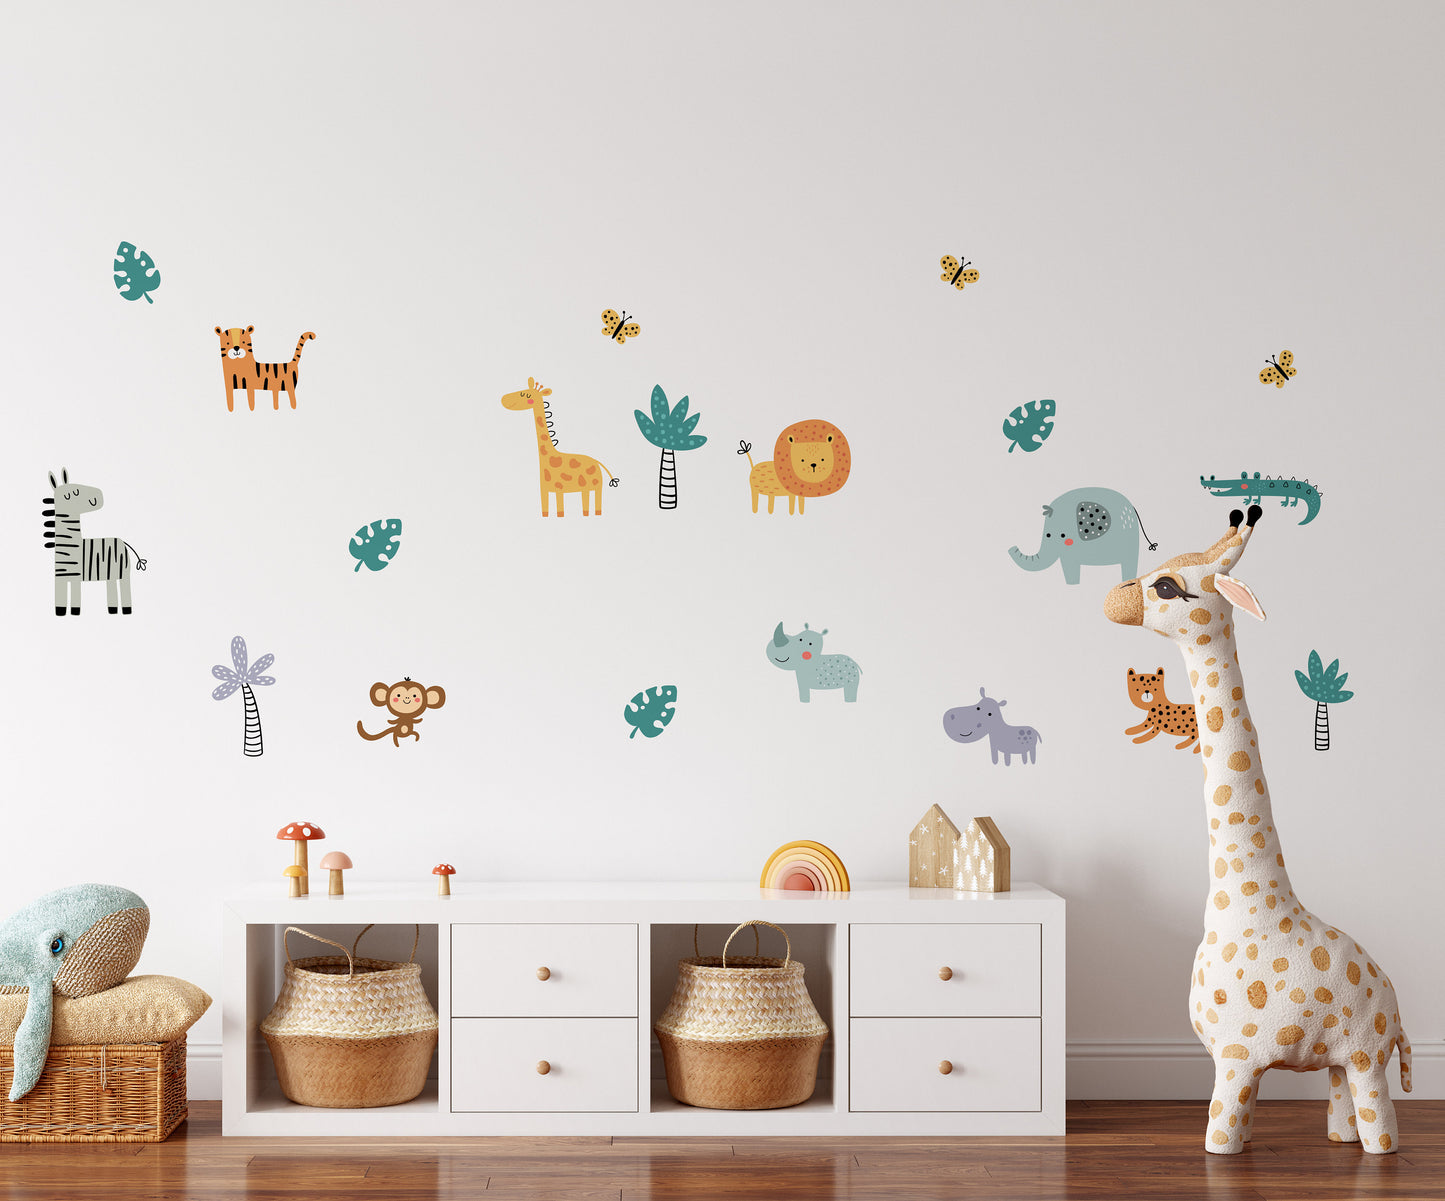 Children's Wall Stickers Animal Cute Safari Wall Decals For Nursery Rooms Jungle Art